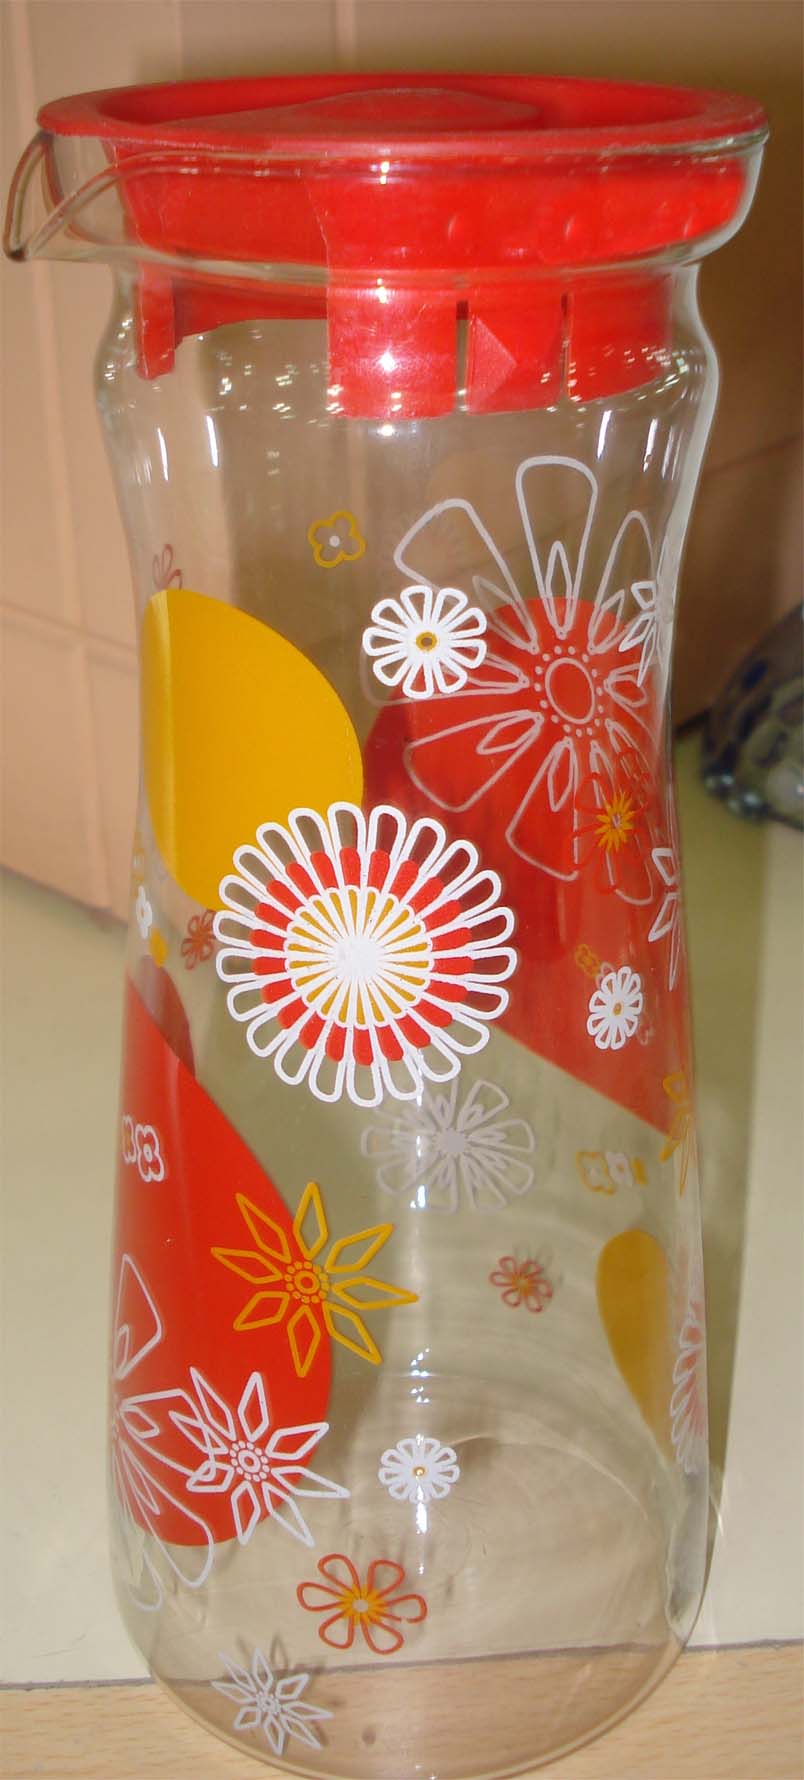 Manufacturers Exporters and Wholesale Suppliers of Glass Ware Delhi Delhi